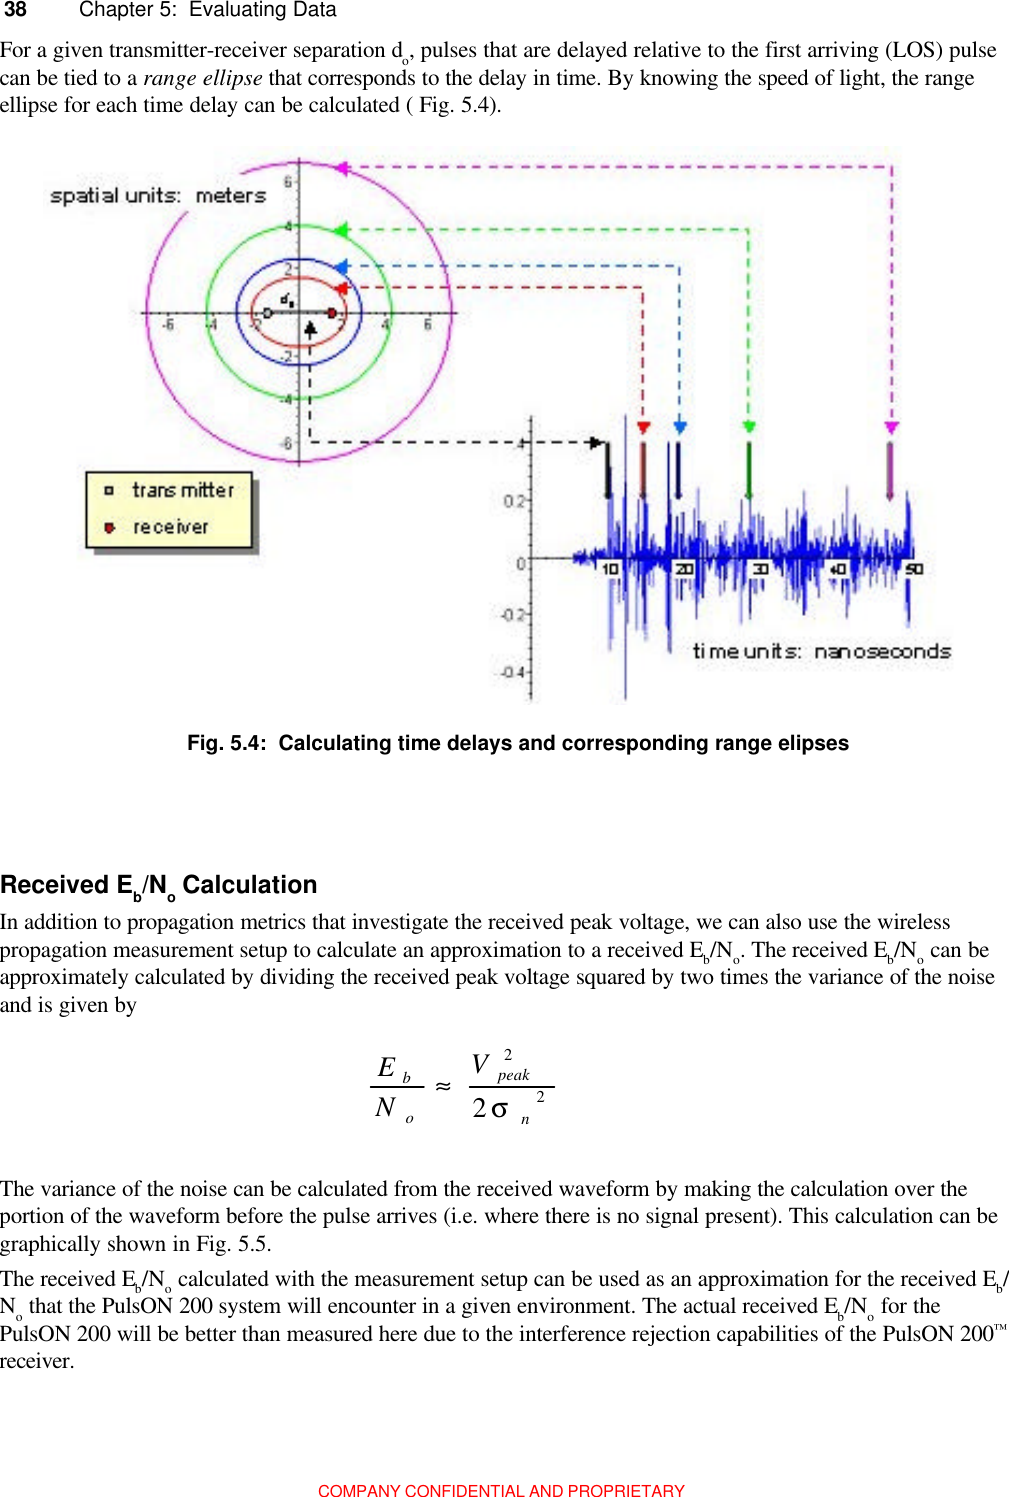 38 Chapter 5:  Evaluating DataCOMPANY CONFIDENTIAL AND PROPRIETARYThe variance of the noise can be calculated from the received waveform by making the calculation over theportion of the waveform before the pulse arrives (i.e. where there is no signal present). This calculation can begraphically shown in Fig. 5.5.The received Eb/No calculated with the measurement setup can be used as an approximation for the received Eb/No that the PulsON 200 system will encounter in a given environment. The actual received Eb/No for thePulsON 200 will be better than measured here due to the interference rejection capabilities of the PulsON 200™receiver.For a given transmitter-receiver separation do, pulses that are delayed relative to the first arriving (LOS) pulsecan be tied to a range ellipse that corresponds to the delay in time. By knowing the speed of light, the rangeellipse for each time delay can be calculated ( Fig. 5.4).Fig. 5.4:  Calculating time delays and corresponding range elipsesReceived Eb/No CalculationIn addition to propagation metrics that investigate the received peak voltage, we can also use the wirelesspropagation measurement setup to calculate an approximation to a received Eb/No. The received Eb/No can beapproximately calculated by dividing the received peak voltage squared by two times the variance of the noiseand is given by222npeakobVNEσ≈